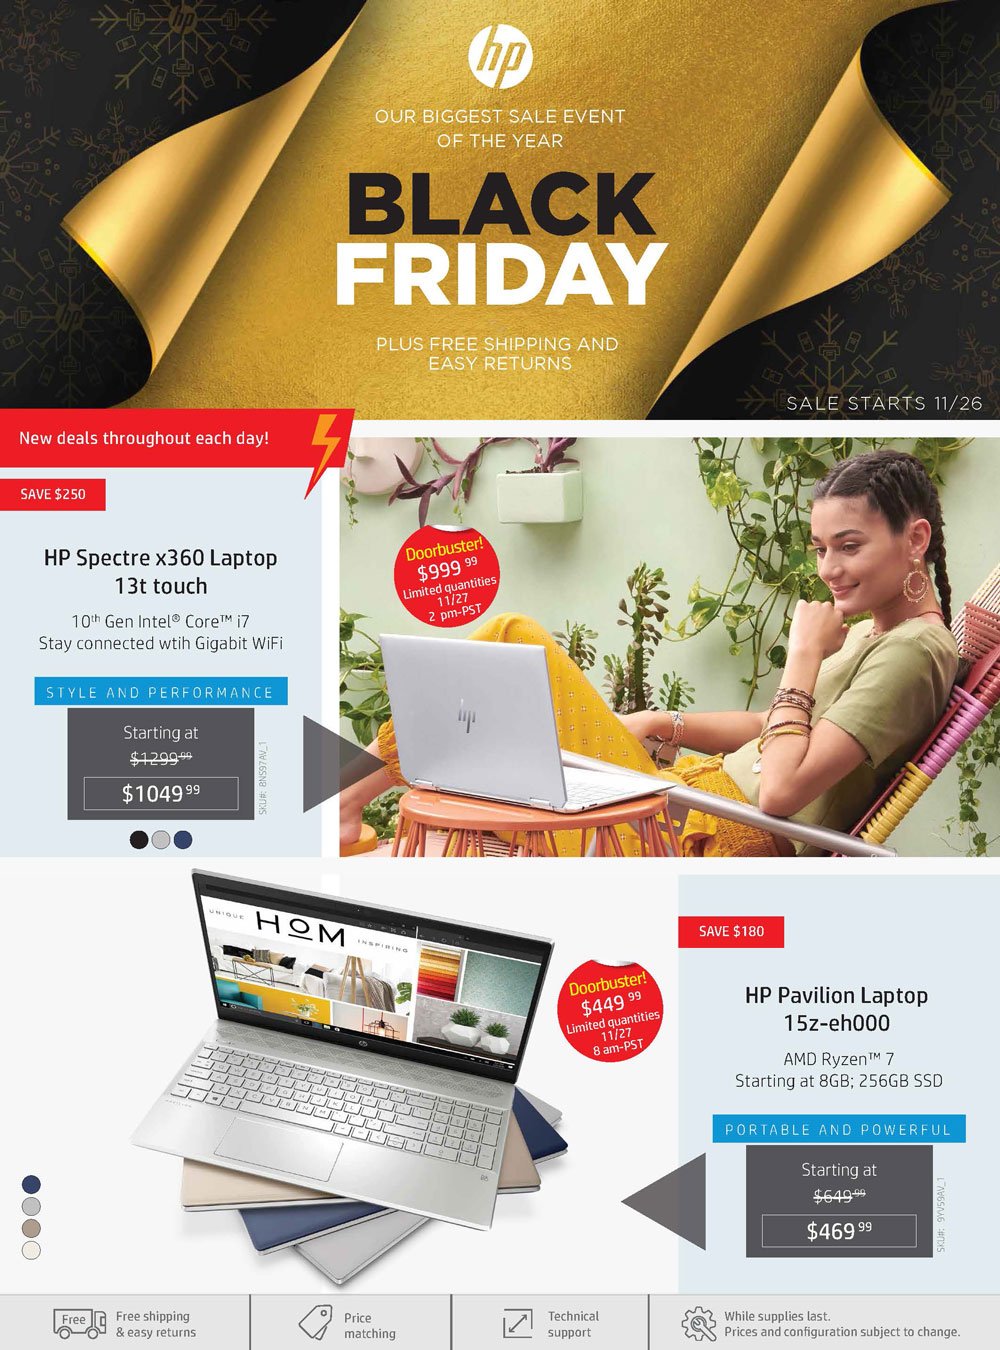 HP Black Friday 2021 Ad - Savings.com - When Are Black Friday Deals Announced 2021